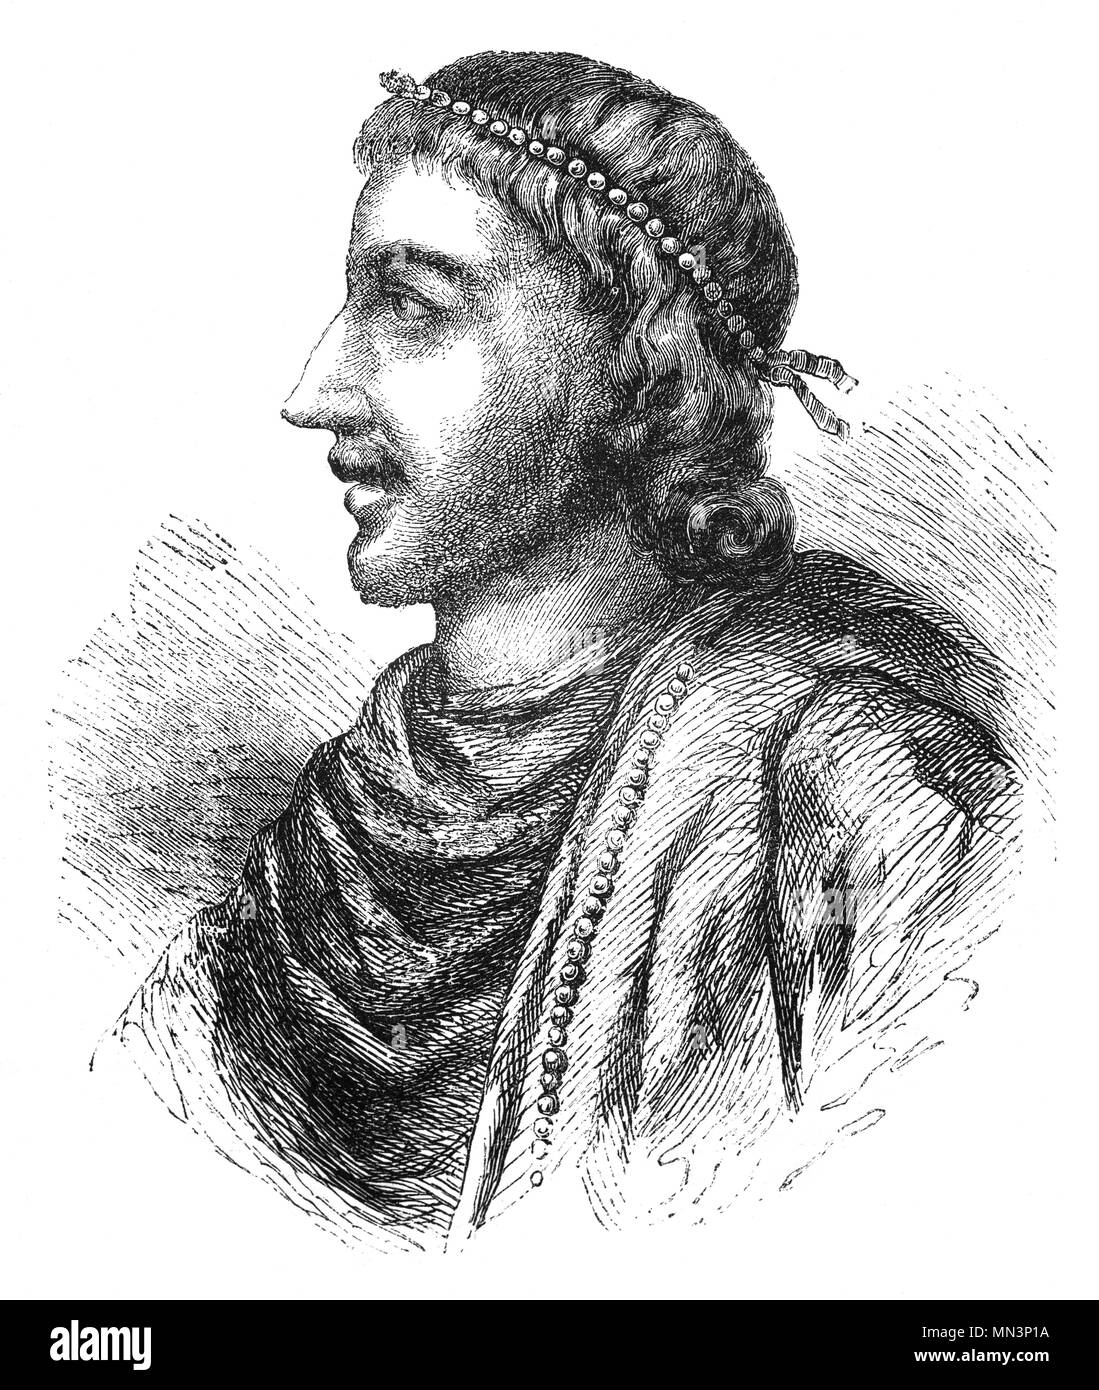 A portrait of Cnut the Great (995–1035), also known as King Canute was King of Denmark, England and Norway; together often referred to as the North Sea Empire. Yet after the deaths of his heirs within a decade of his own, and the Norman conquest of England in 1066, this legacy was lost. He is popularly invoked in the context of the legend of King Canute and the tide, which usually misrepresents him as a deluded monarch believing he has supernatural powers, contrary to the original legend which portrays a wise king who rebuked his courtiers for their fawning behaviour. Stock Photo